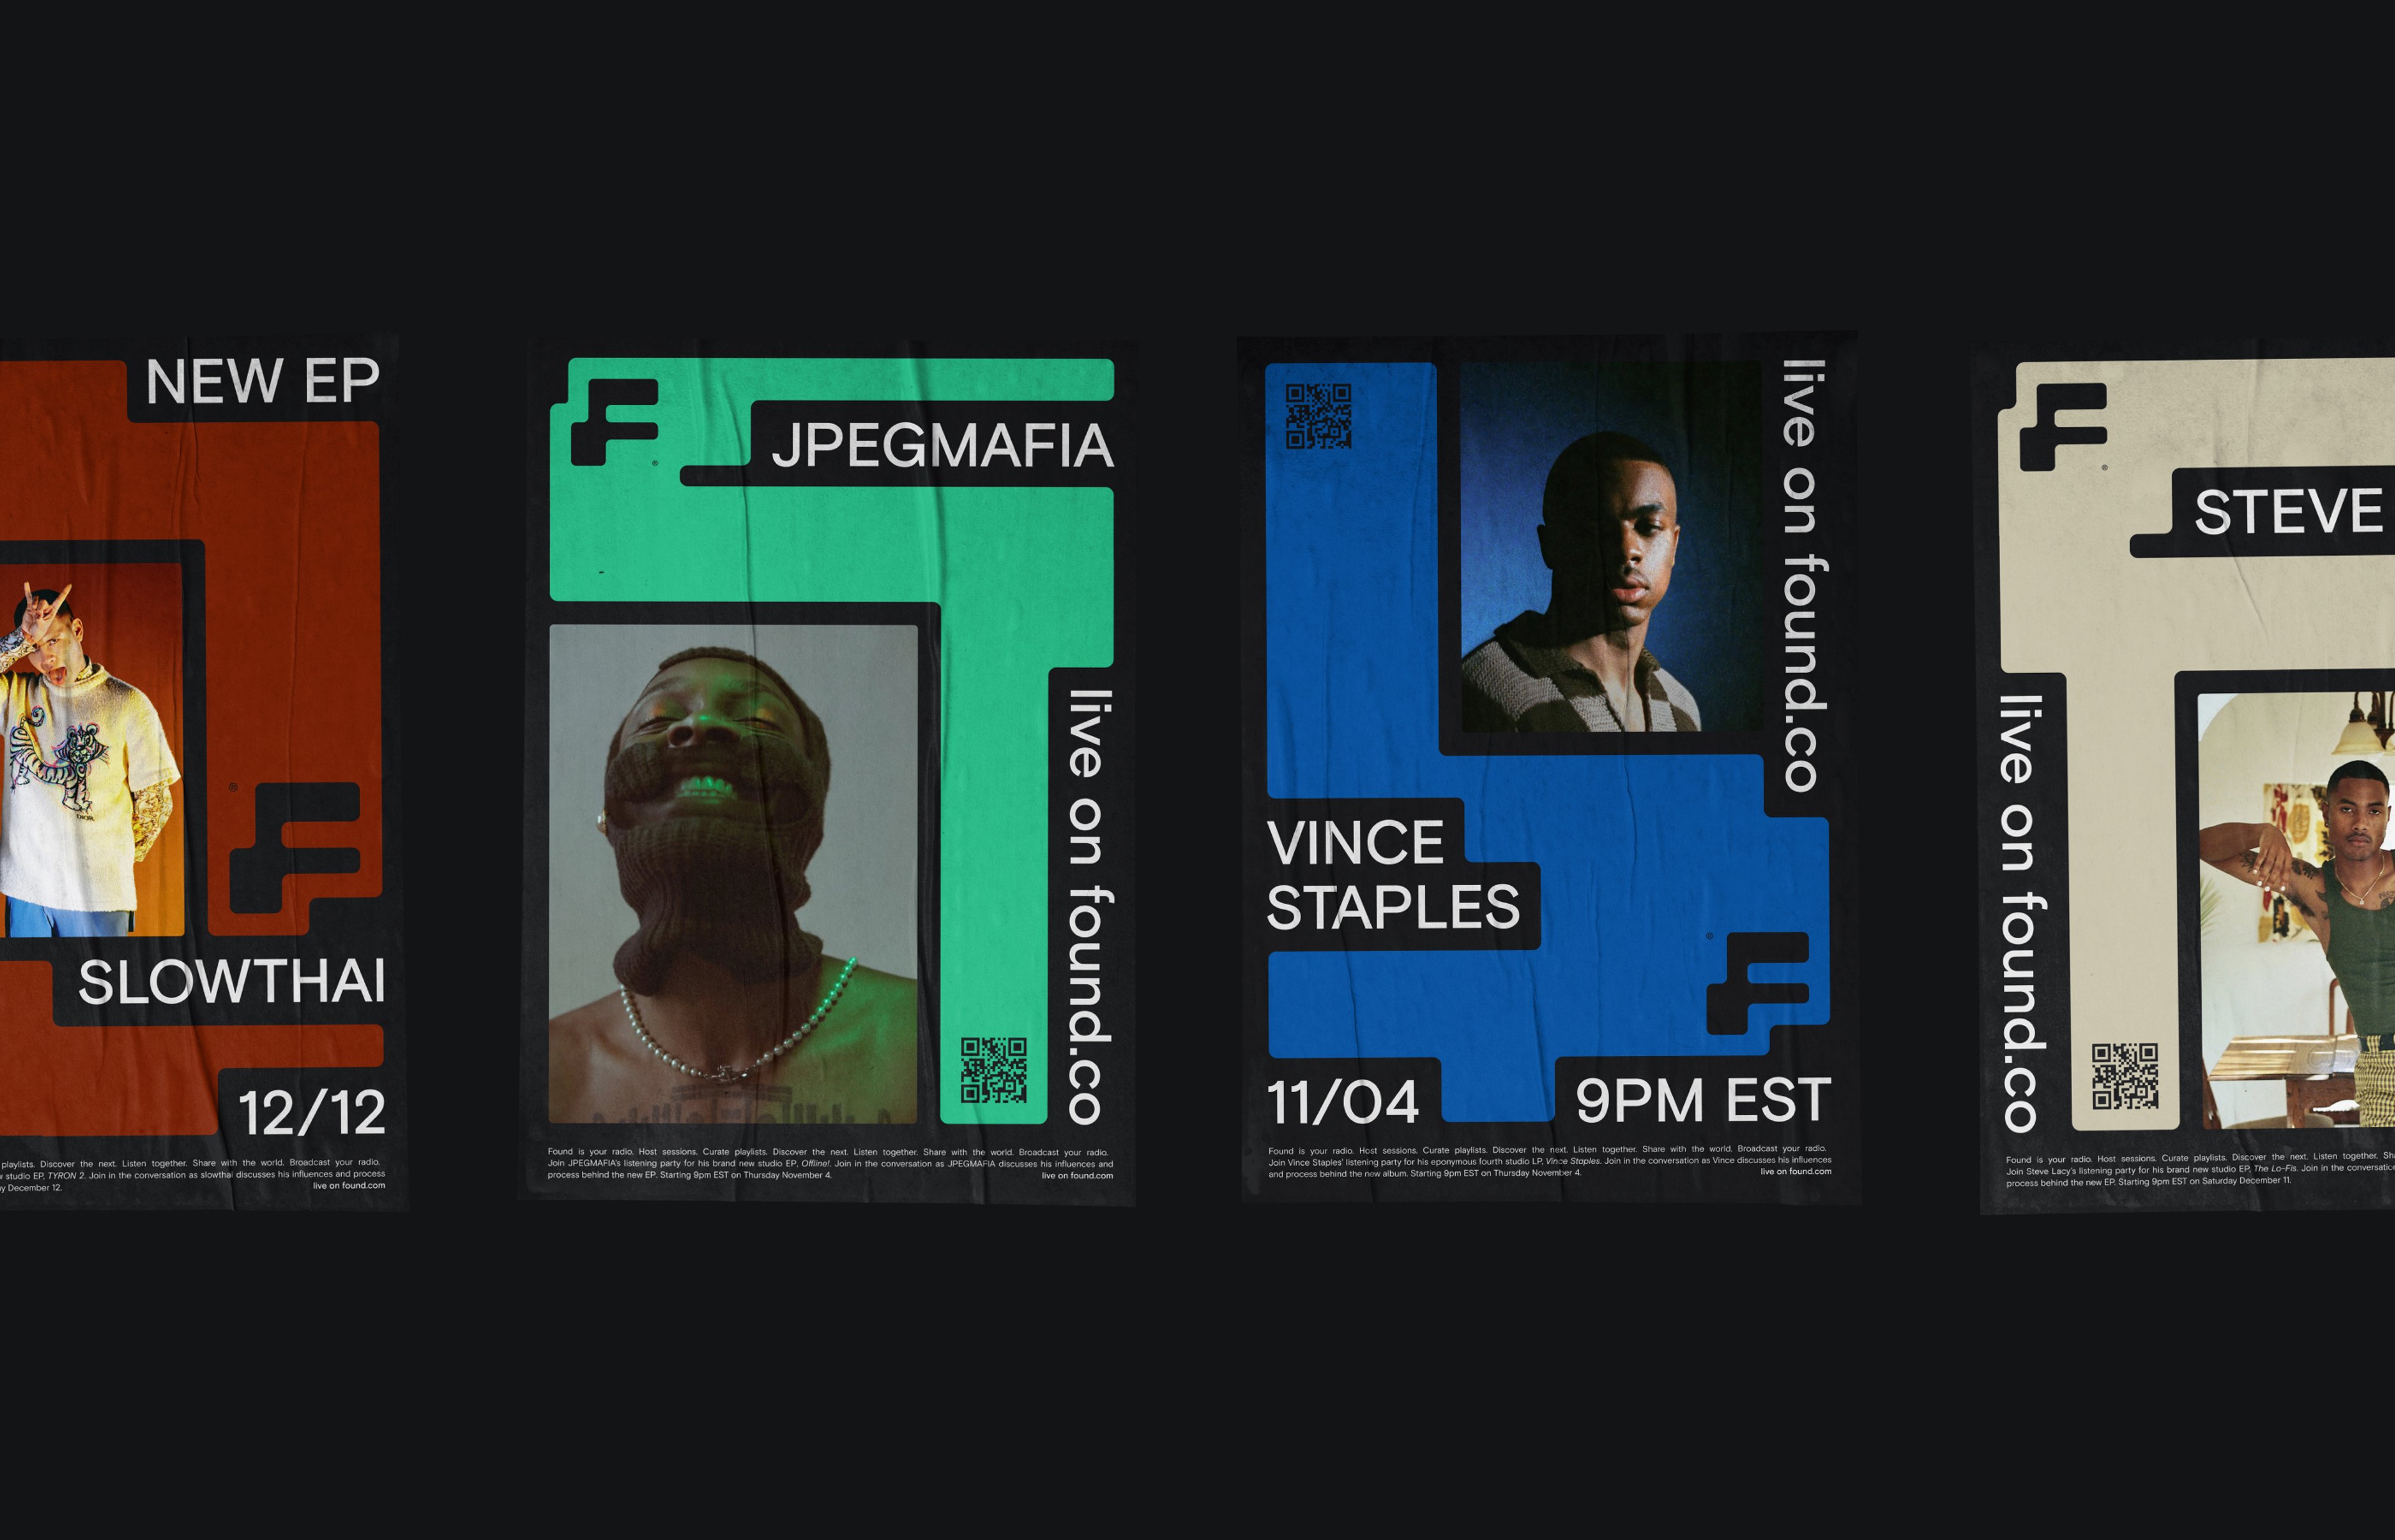 Image of various brand posters showing upcoming live events by Slowthai, JPEGMAFIA, Vince Staples, and Steve Lacy